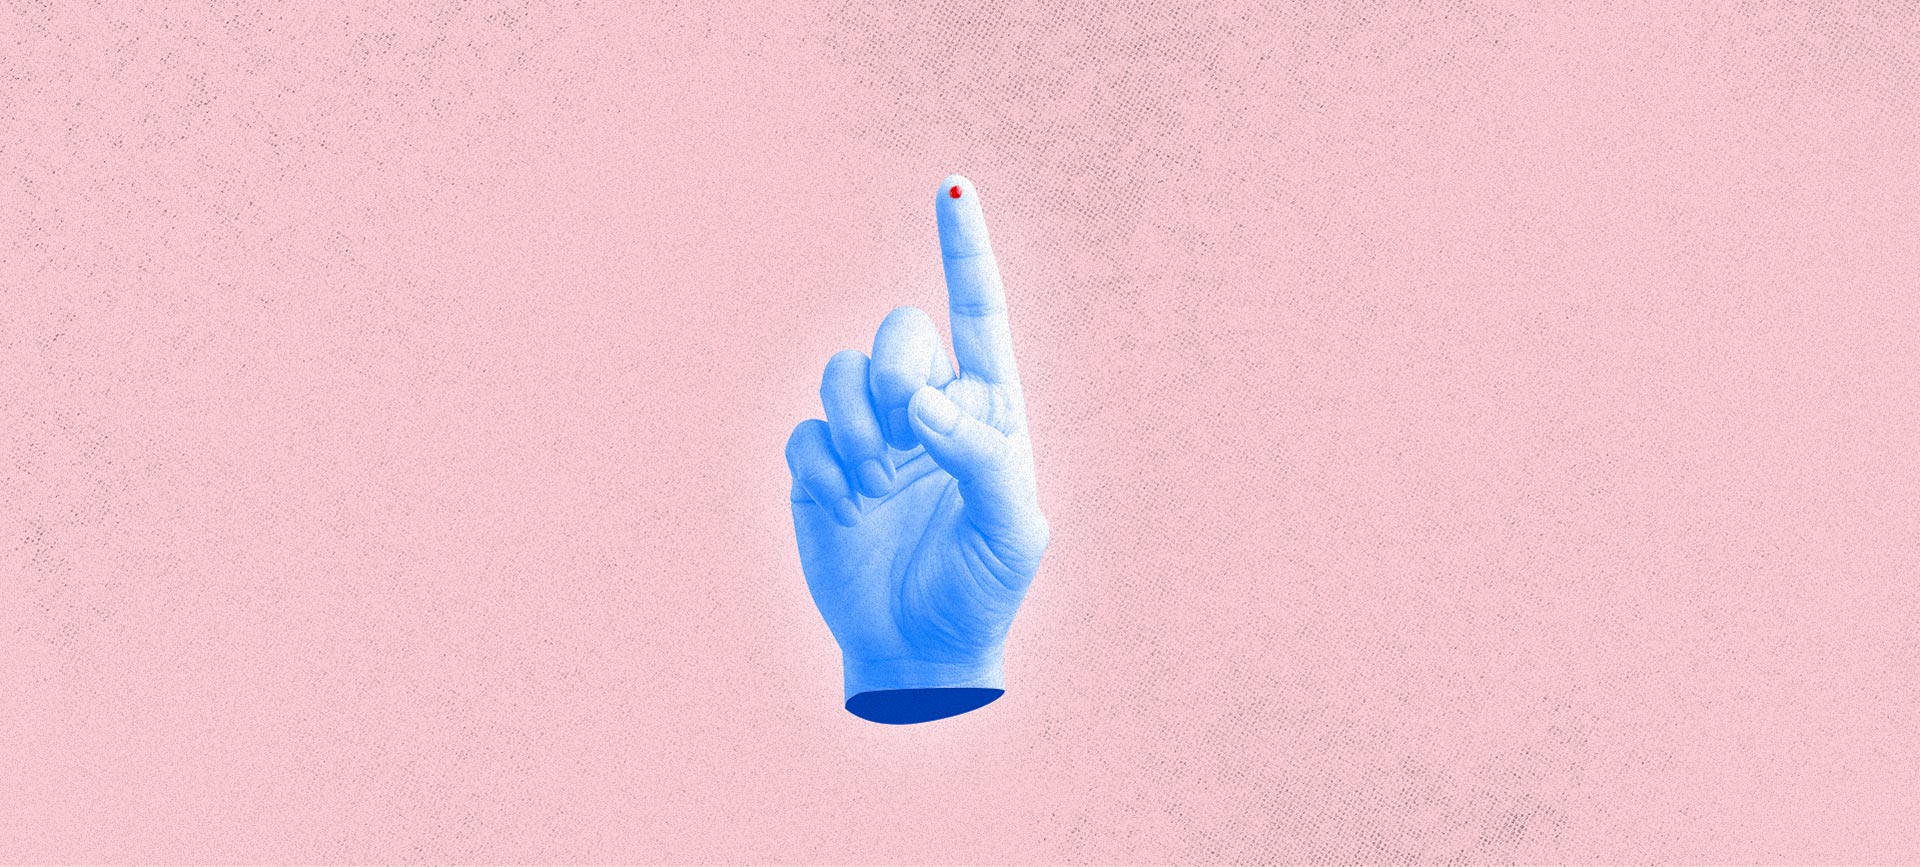 A blue hand has a drop of blood on the tip of its index finger against a pink background.